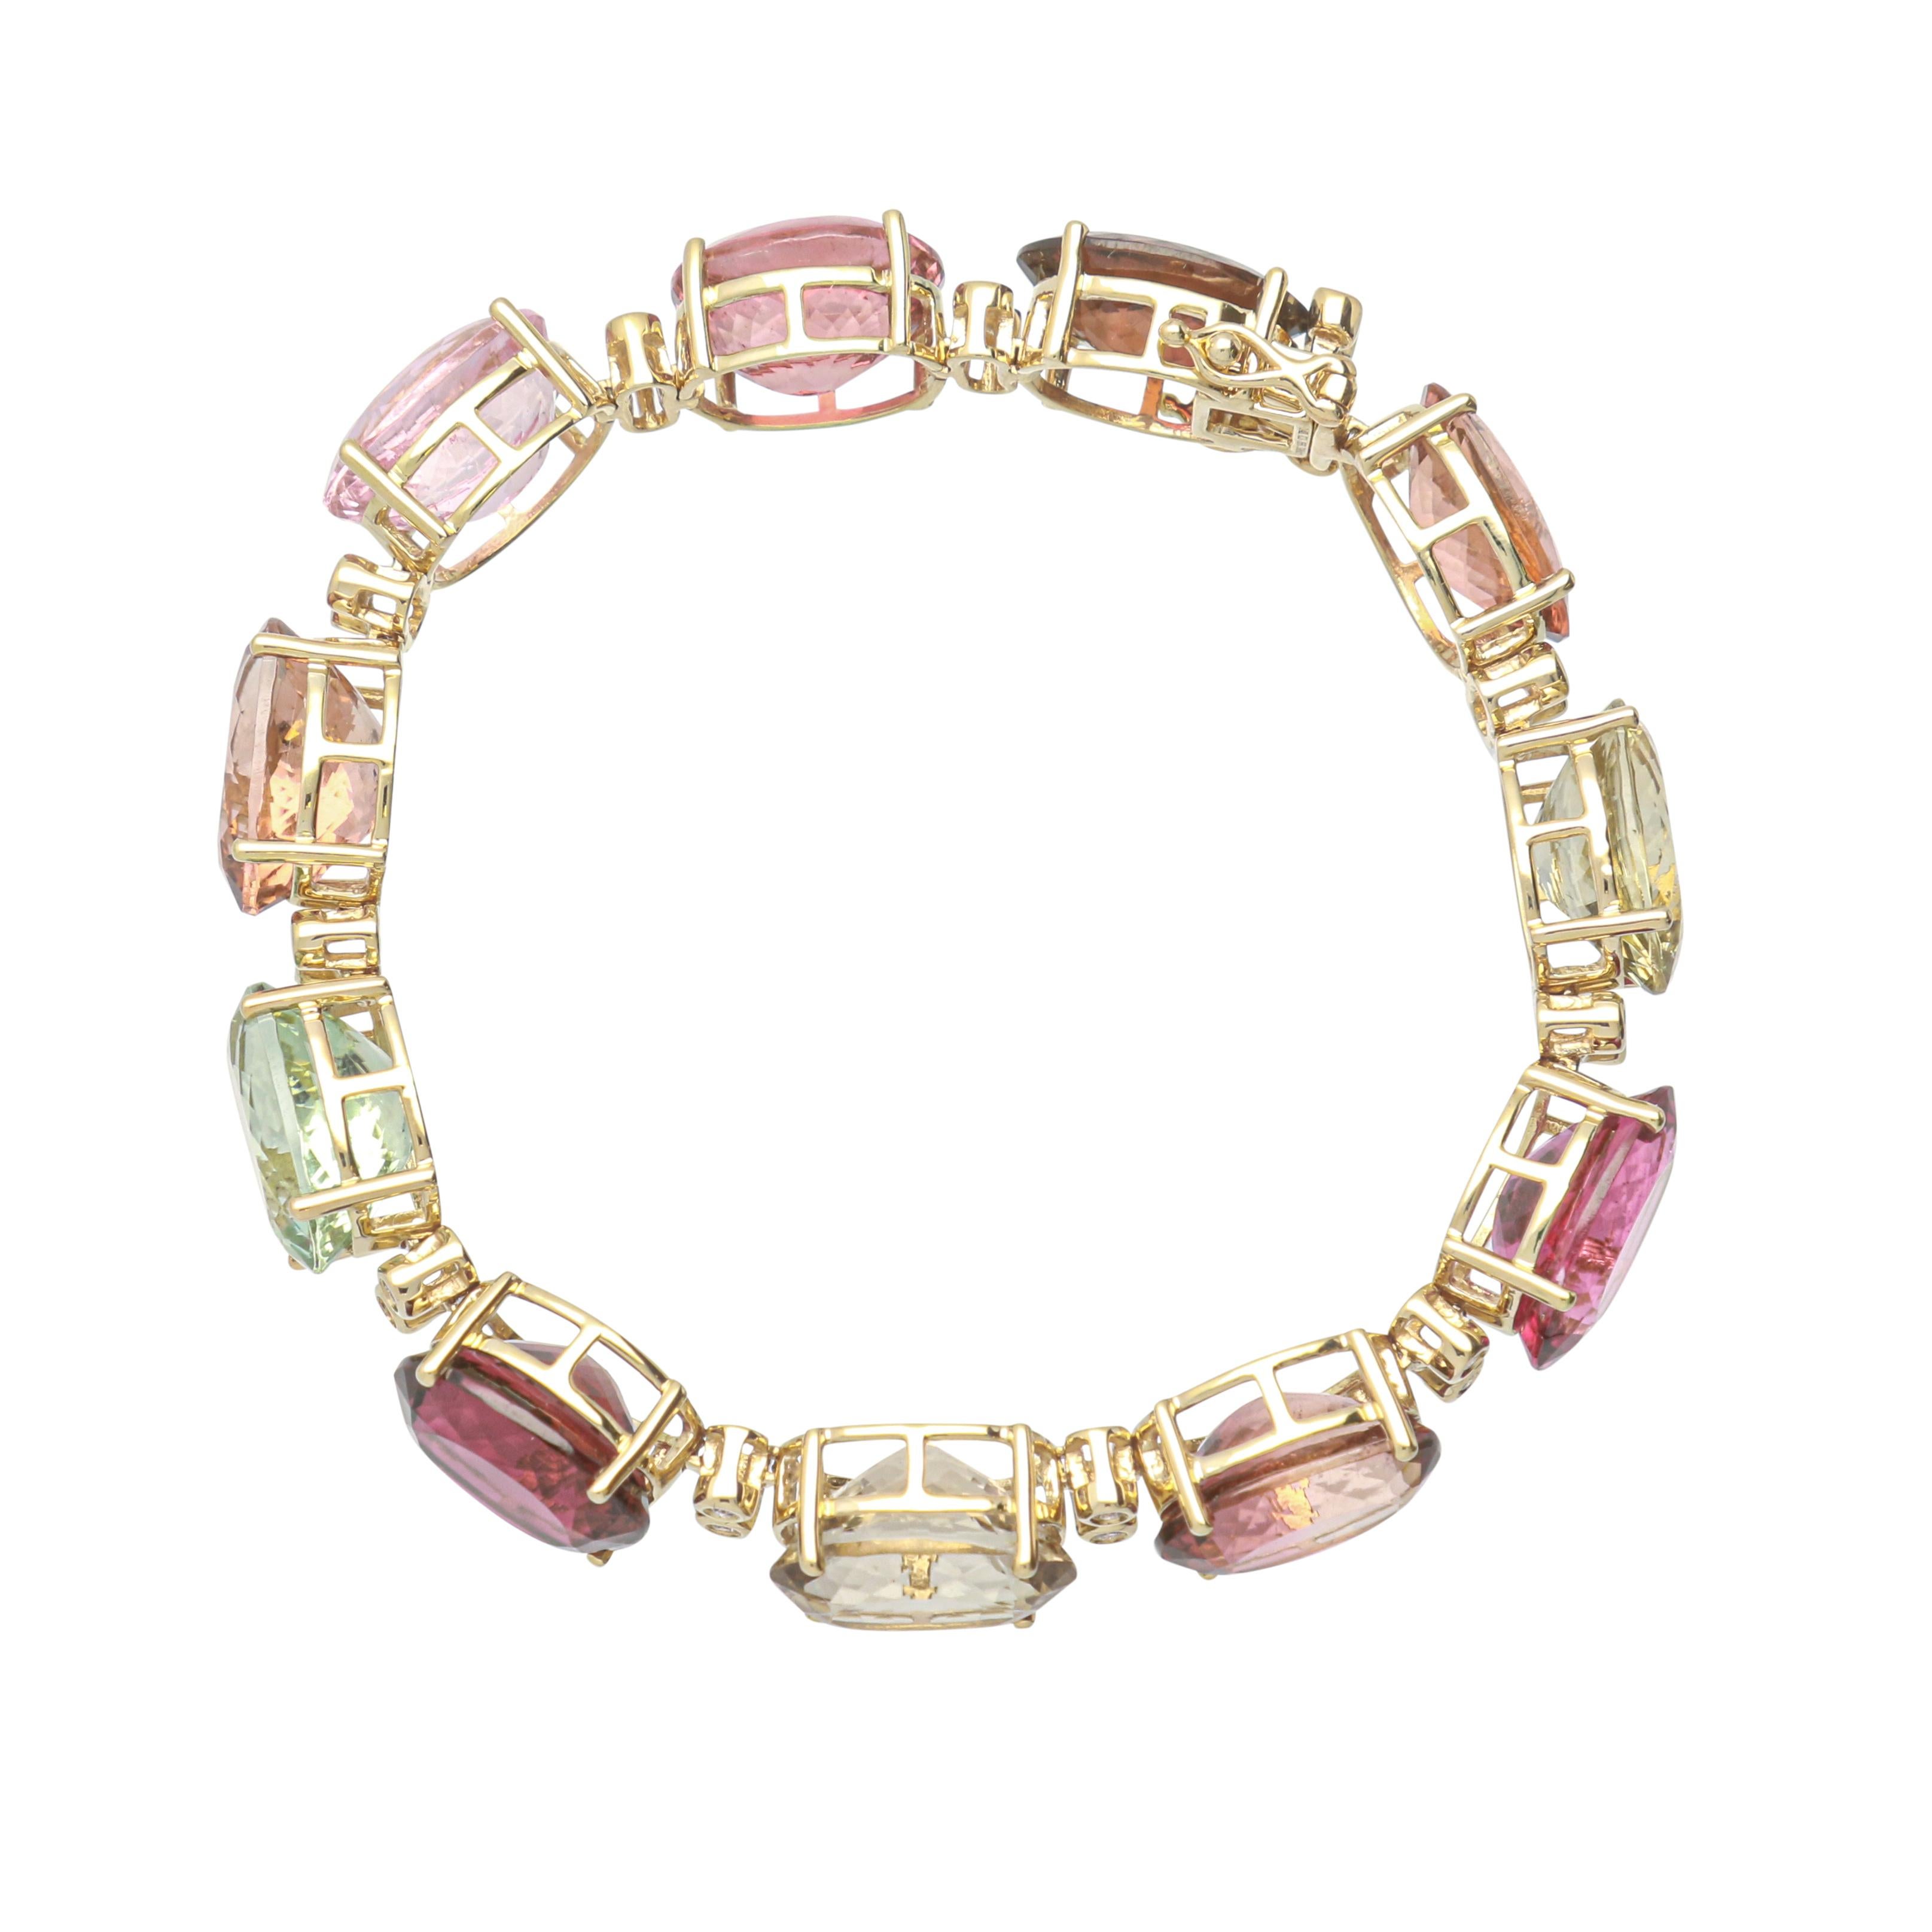 This one of a kind Bracelet is crafted in 14-karat Yellow Gold and features 11 Multi Color Tourmalines 66.98 Carat & 22 Round Diamonds with total carat weight of 0.22 Carat. This Bracelet comes in size 6.75